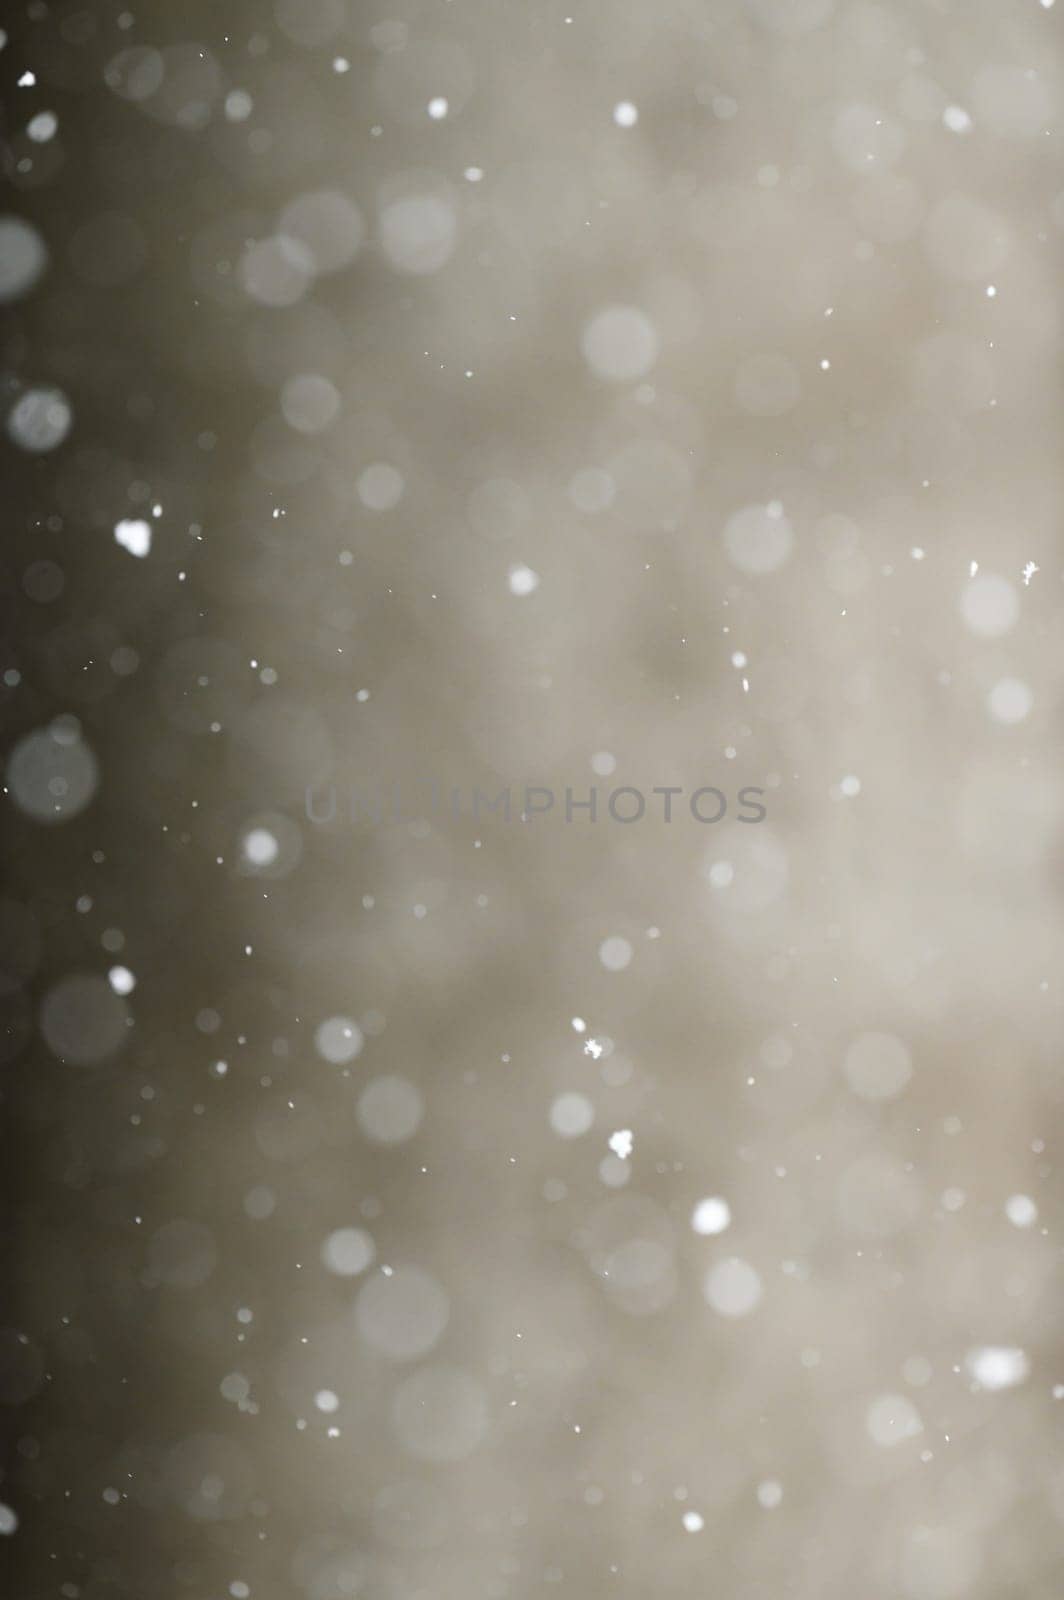 Bokeh of white snow on a light background. Falling snowflakes, isolated for post production and overlay in graphic editor.